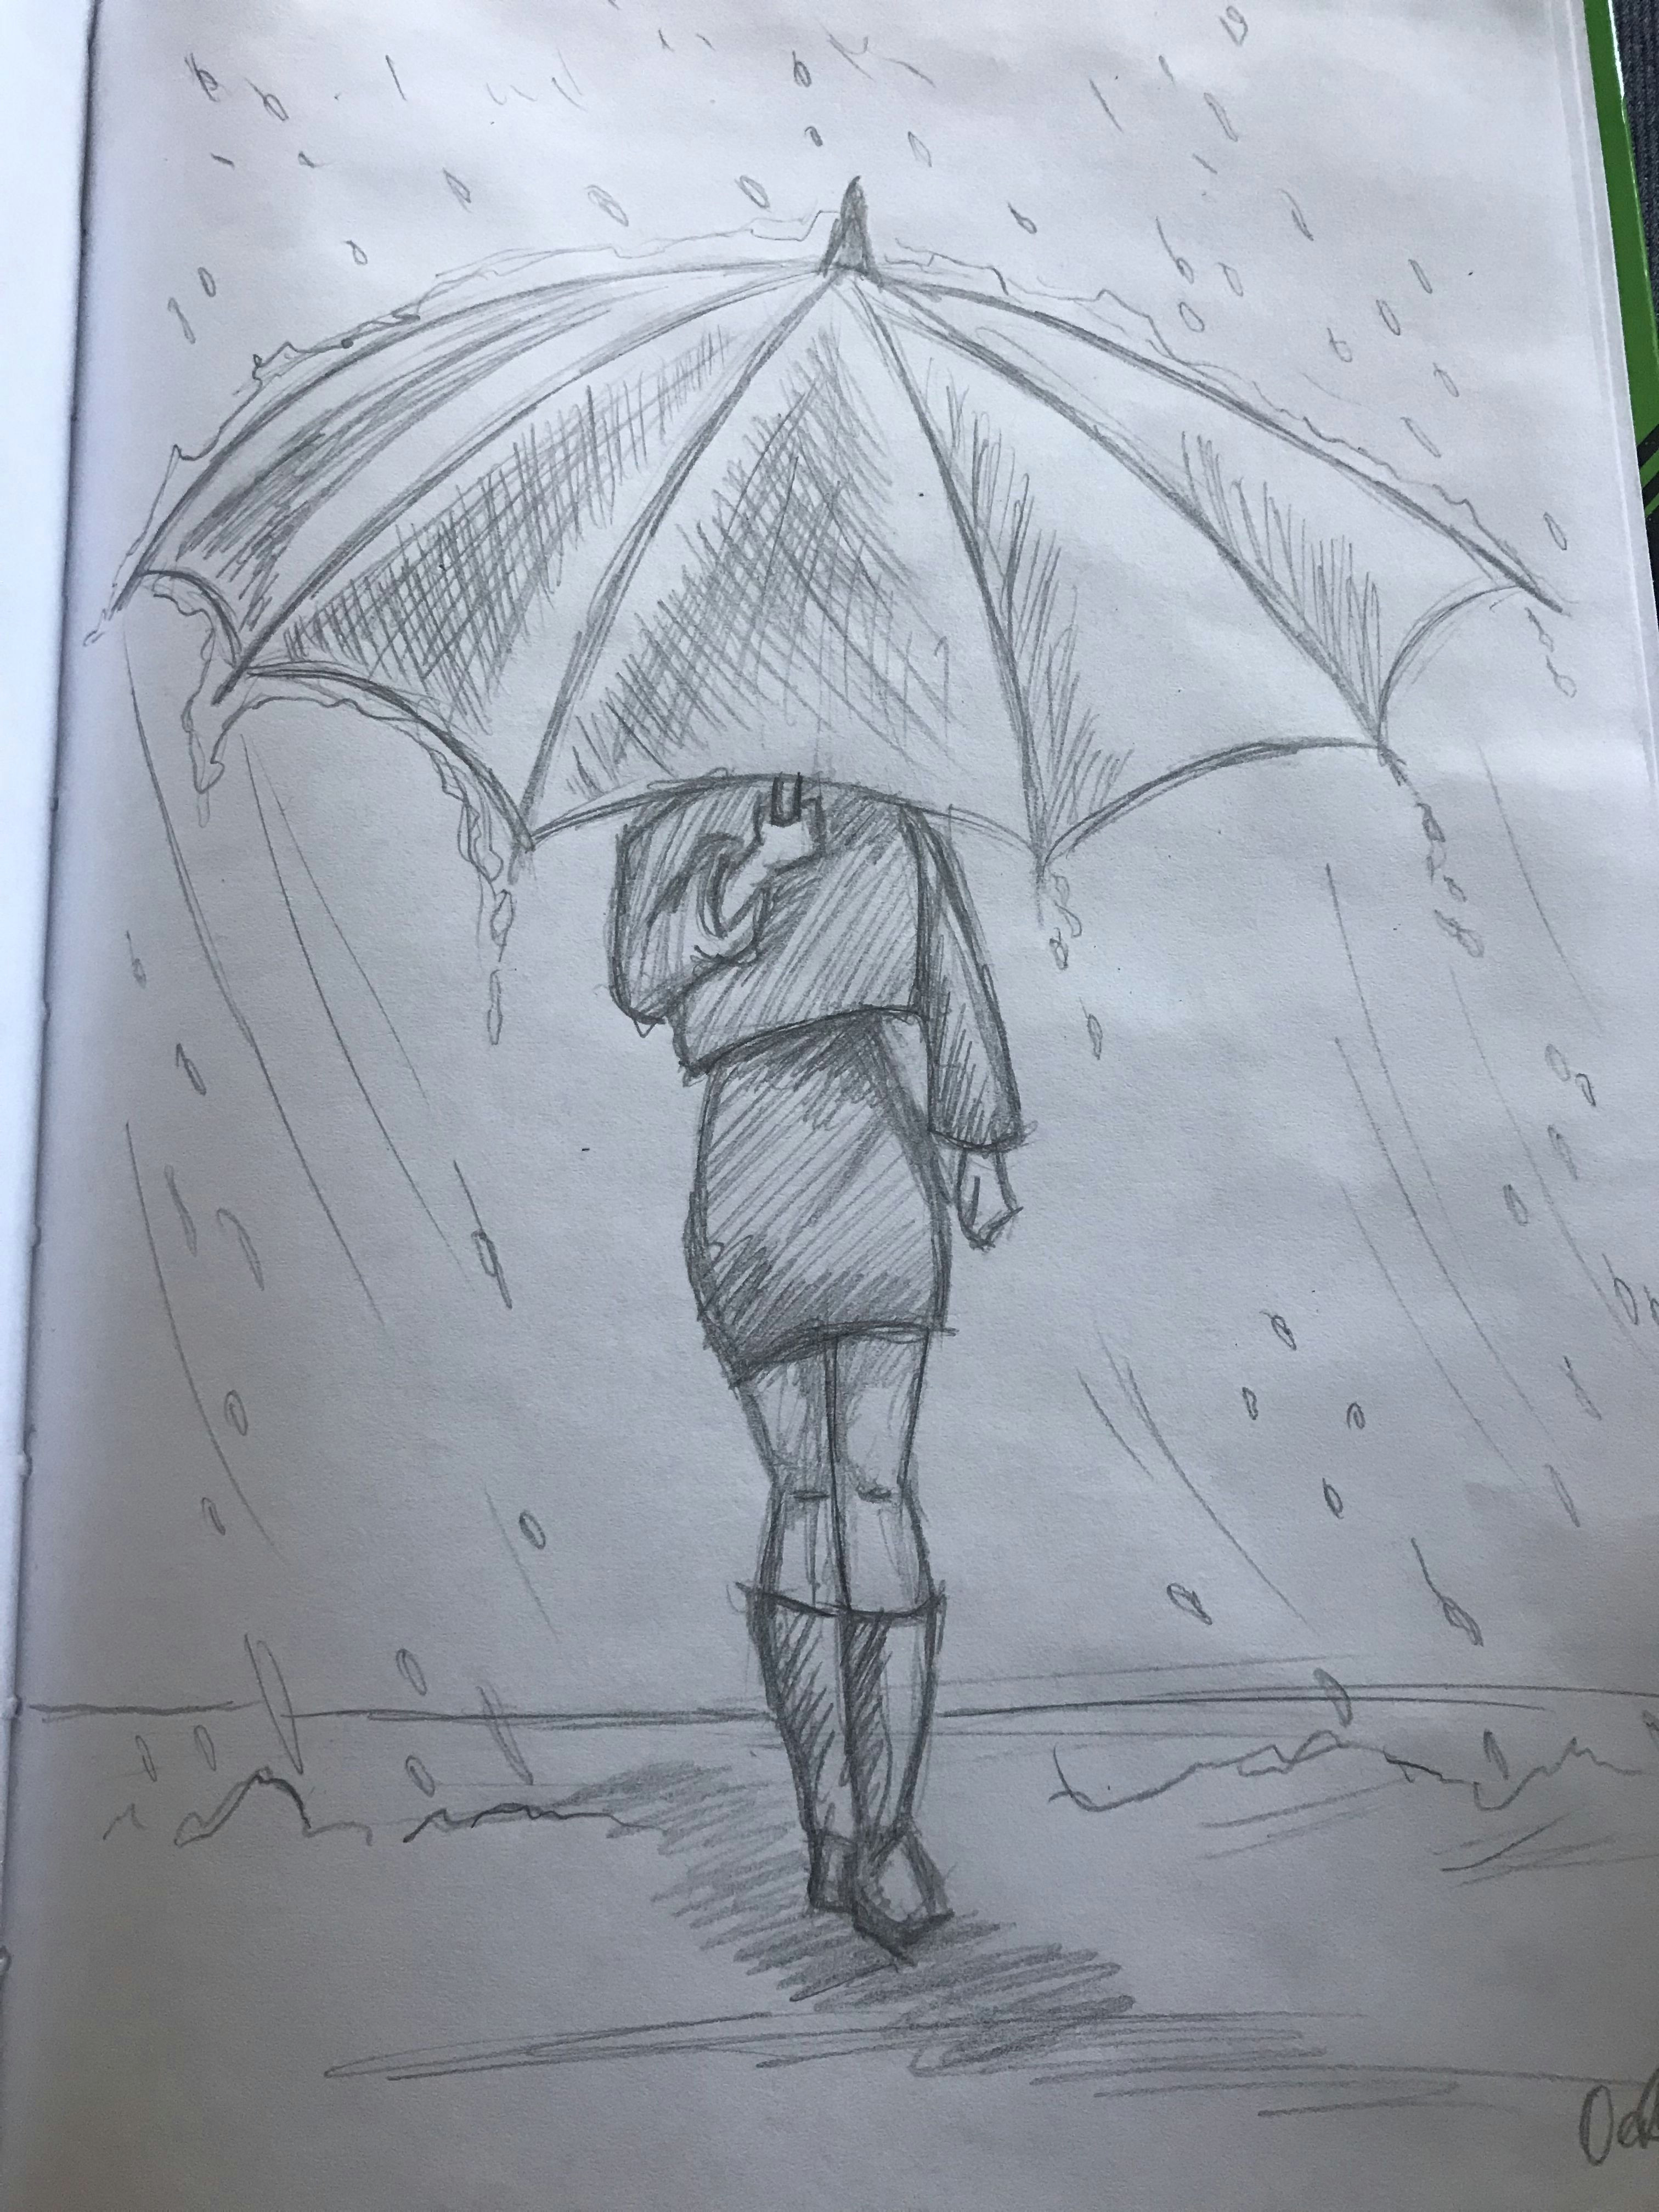 Cartoon Umbrella Drawing Images Tra S Beau Dessin Art and Drawing Ideas In 2019 Drawings Art